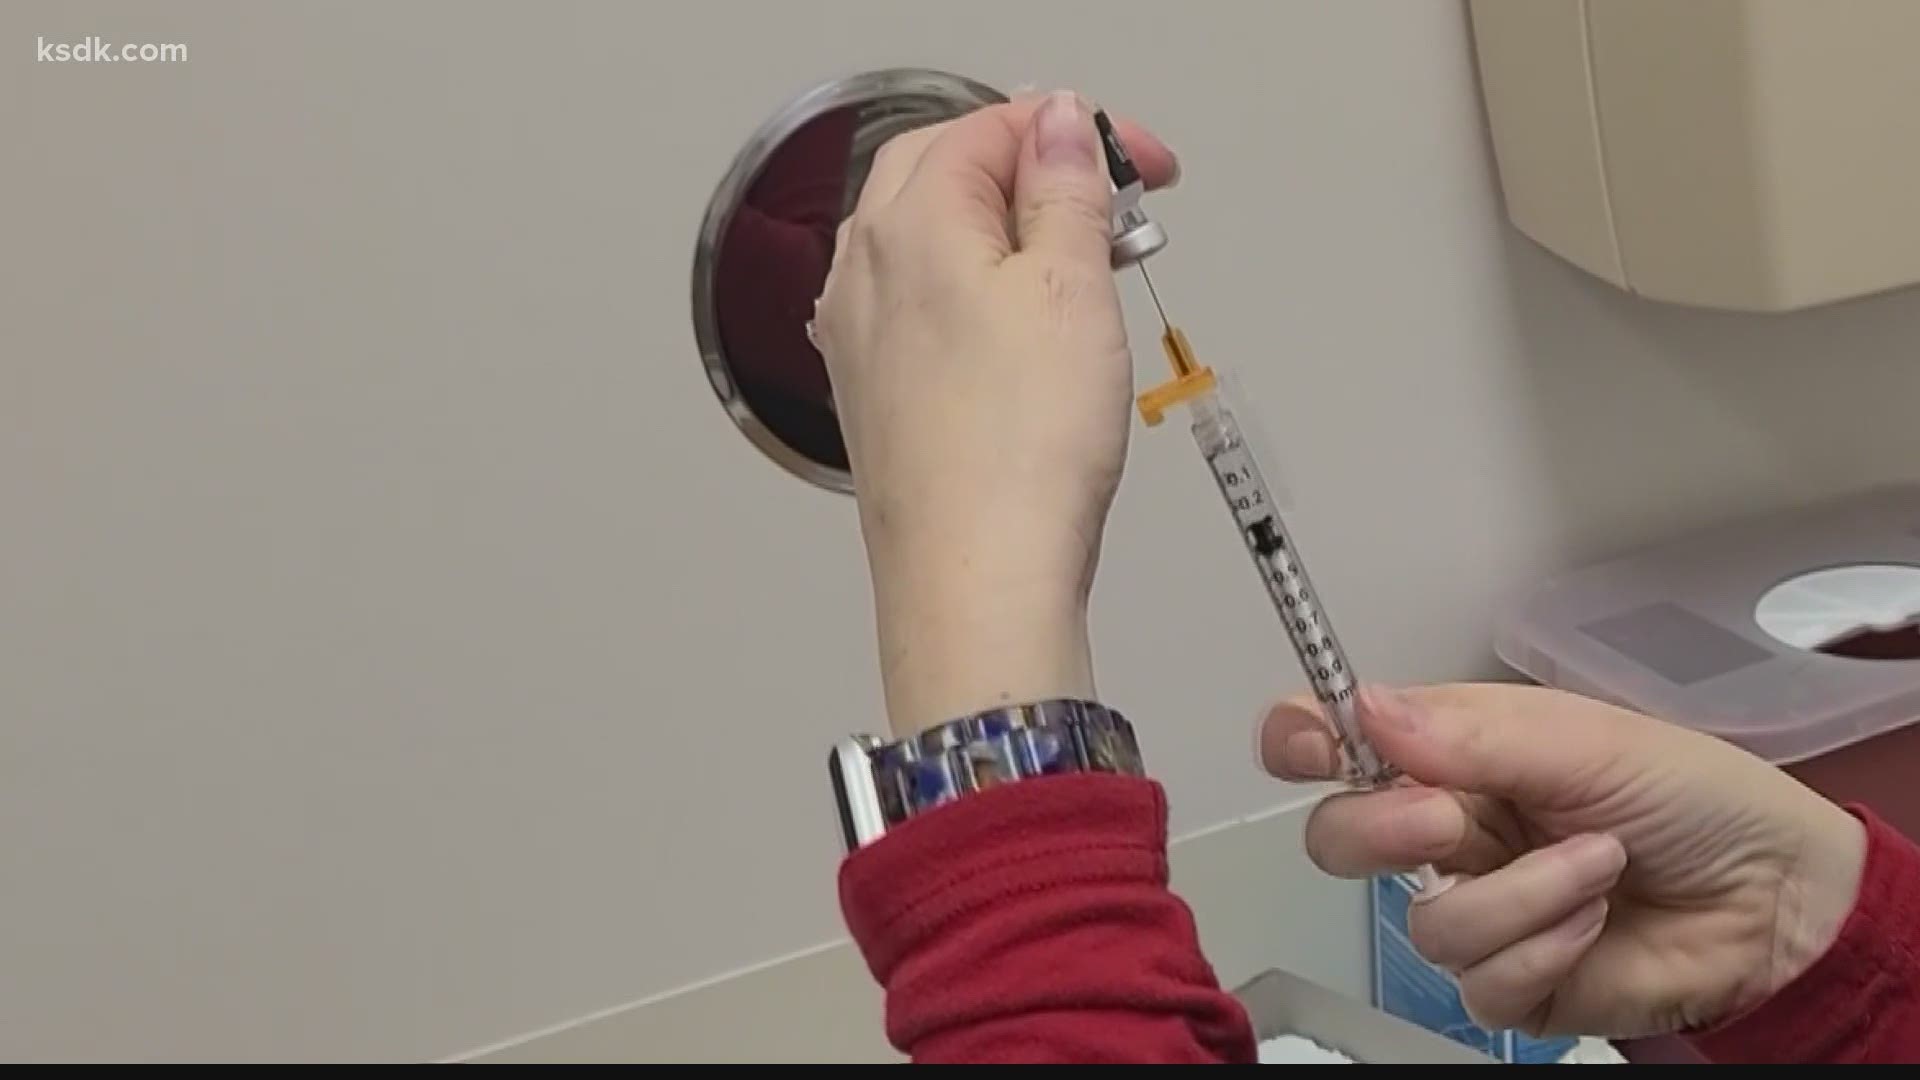 In the St. Louis area, medical offices that see some of the area's most vulnerable patients don't know when they'll have access to the COVID-19 vaccine